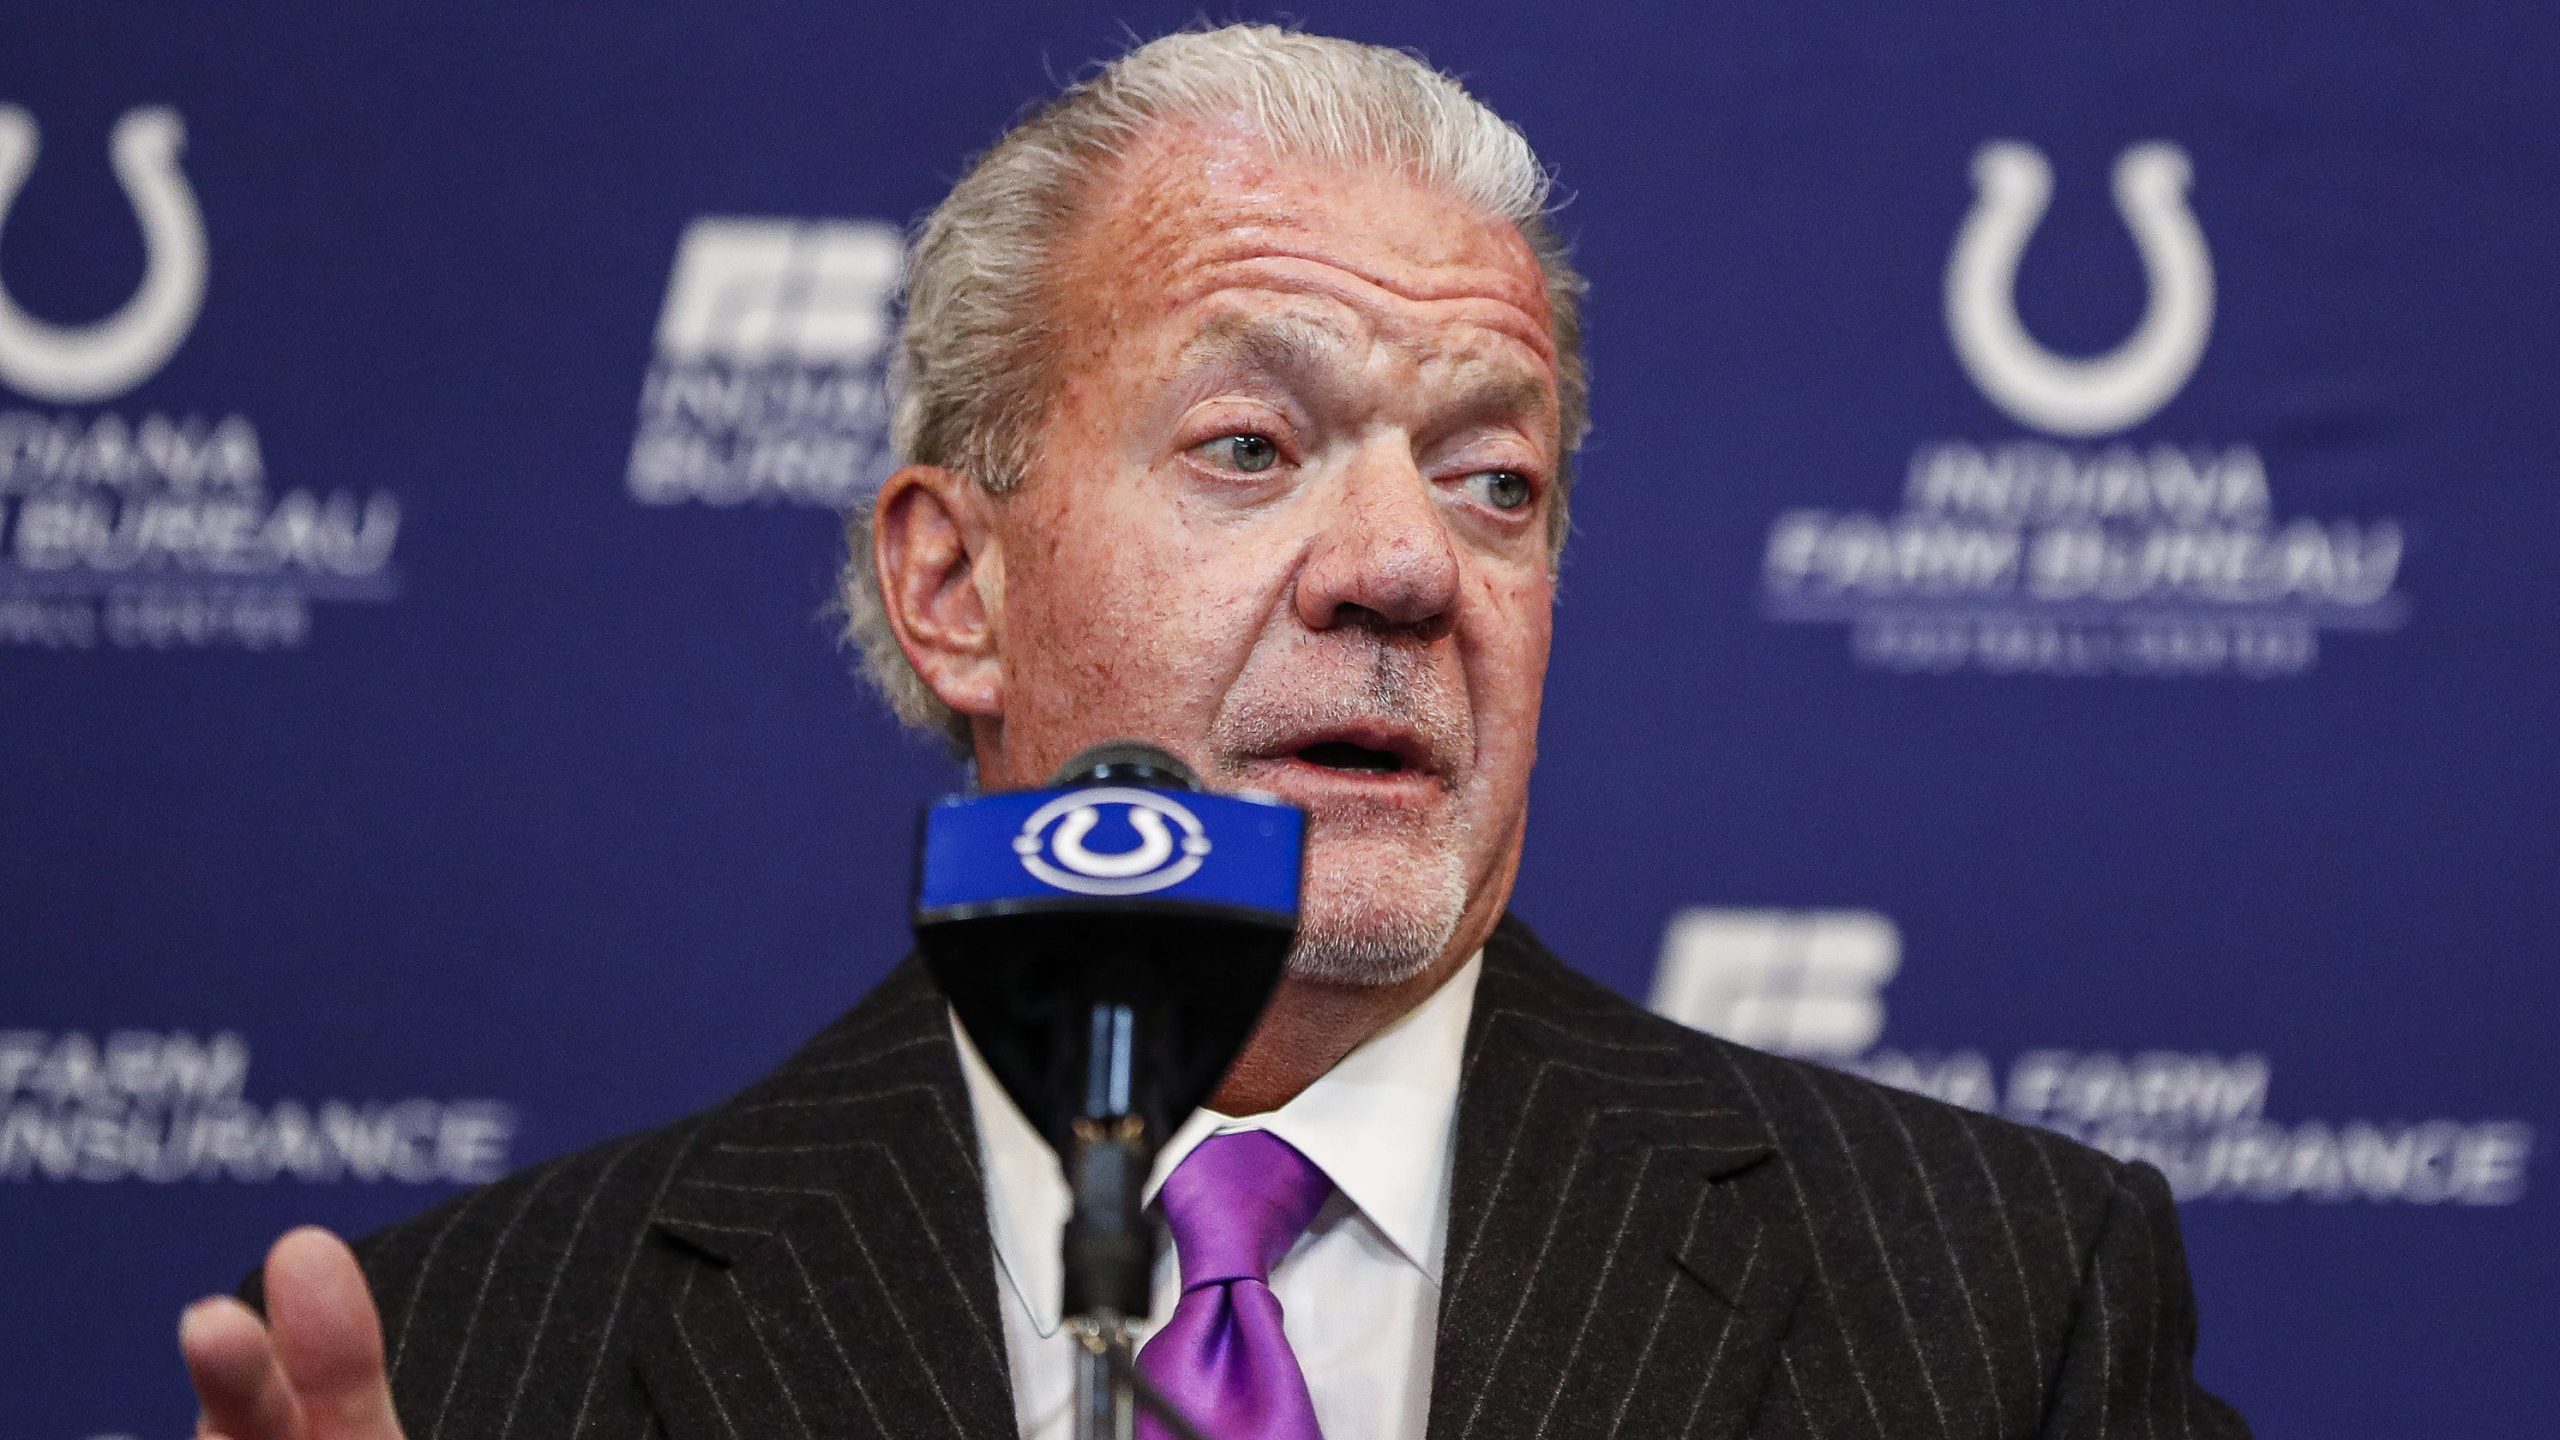 Colts owner Jim Irsay says he will donate 10,000 N95 masks to Indiana Department of Health